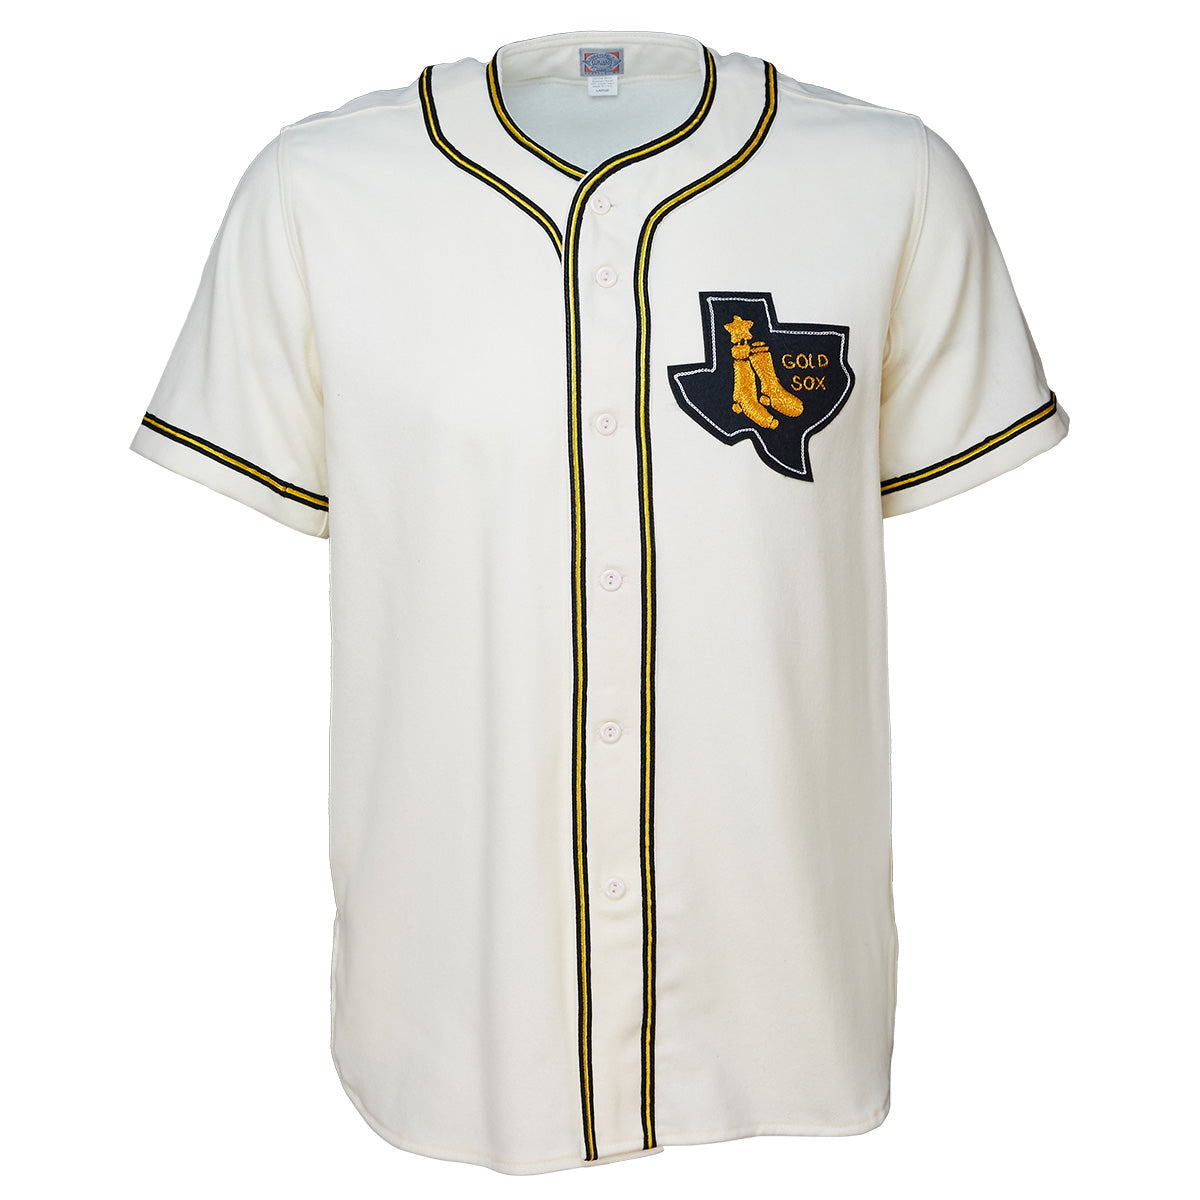 Ebbets Field Flannels Amarillo Gold Sox 1961 Home Jersey